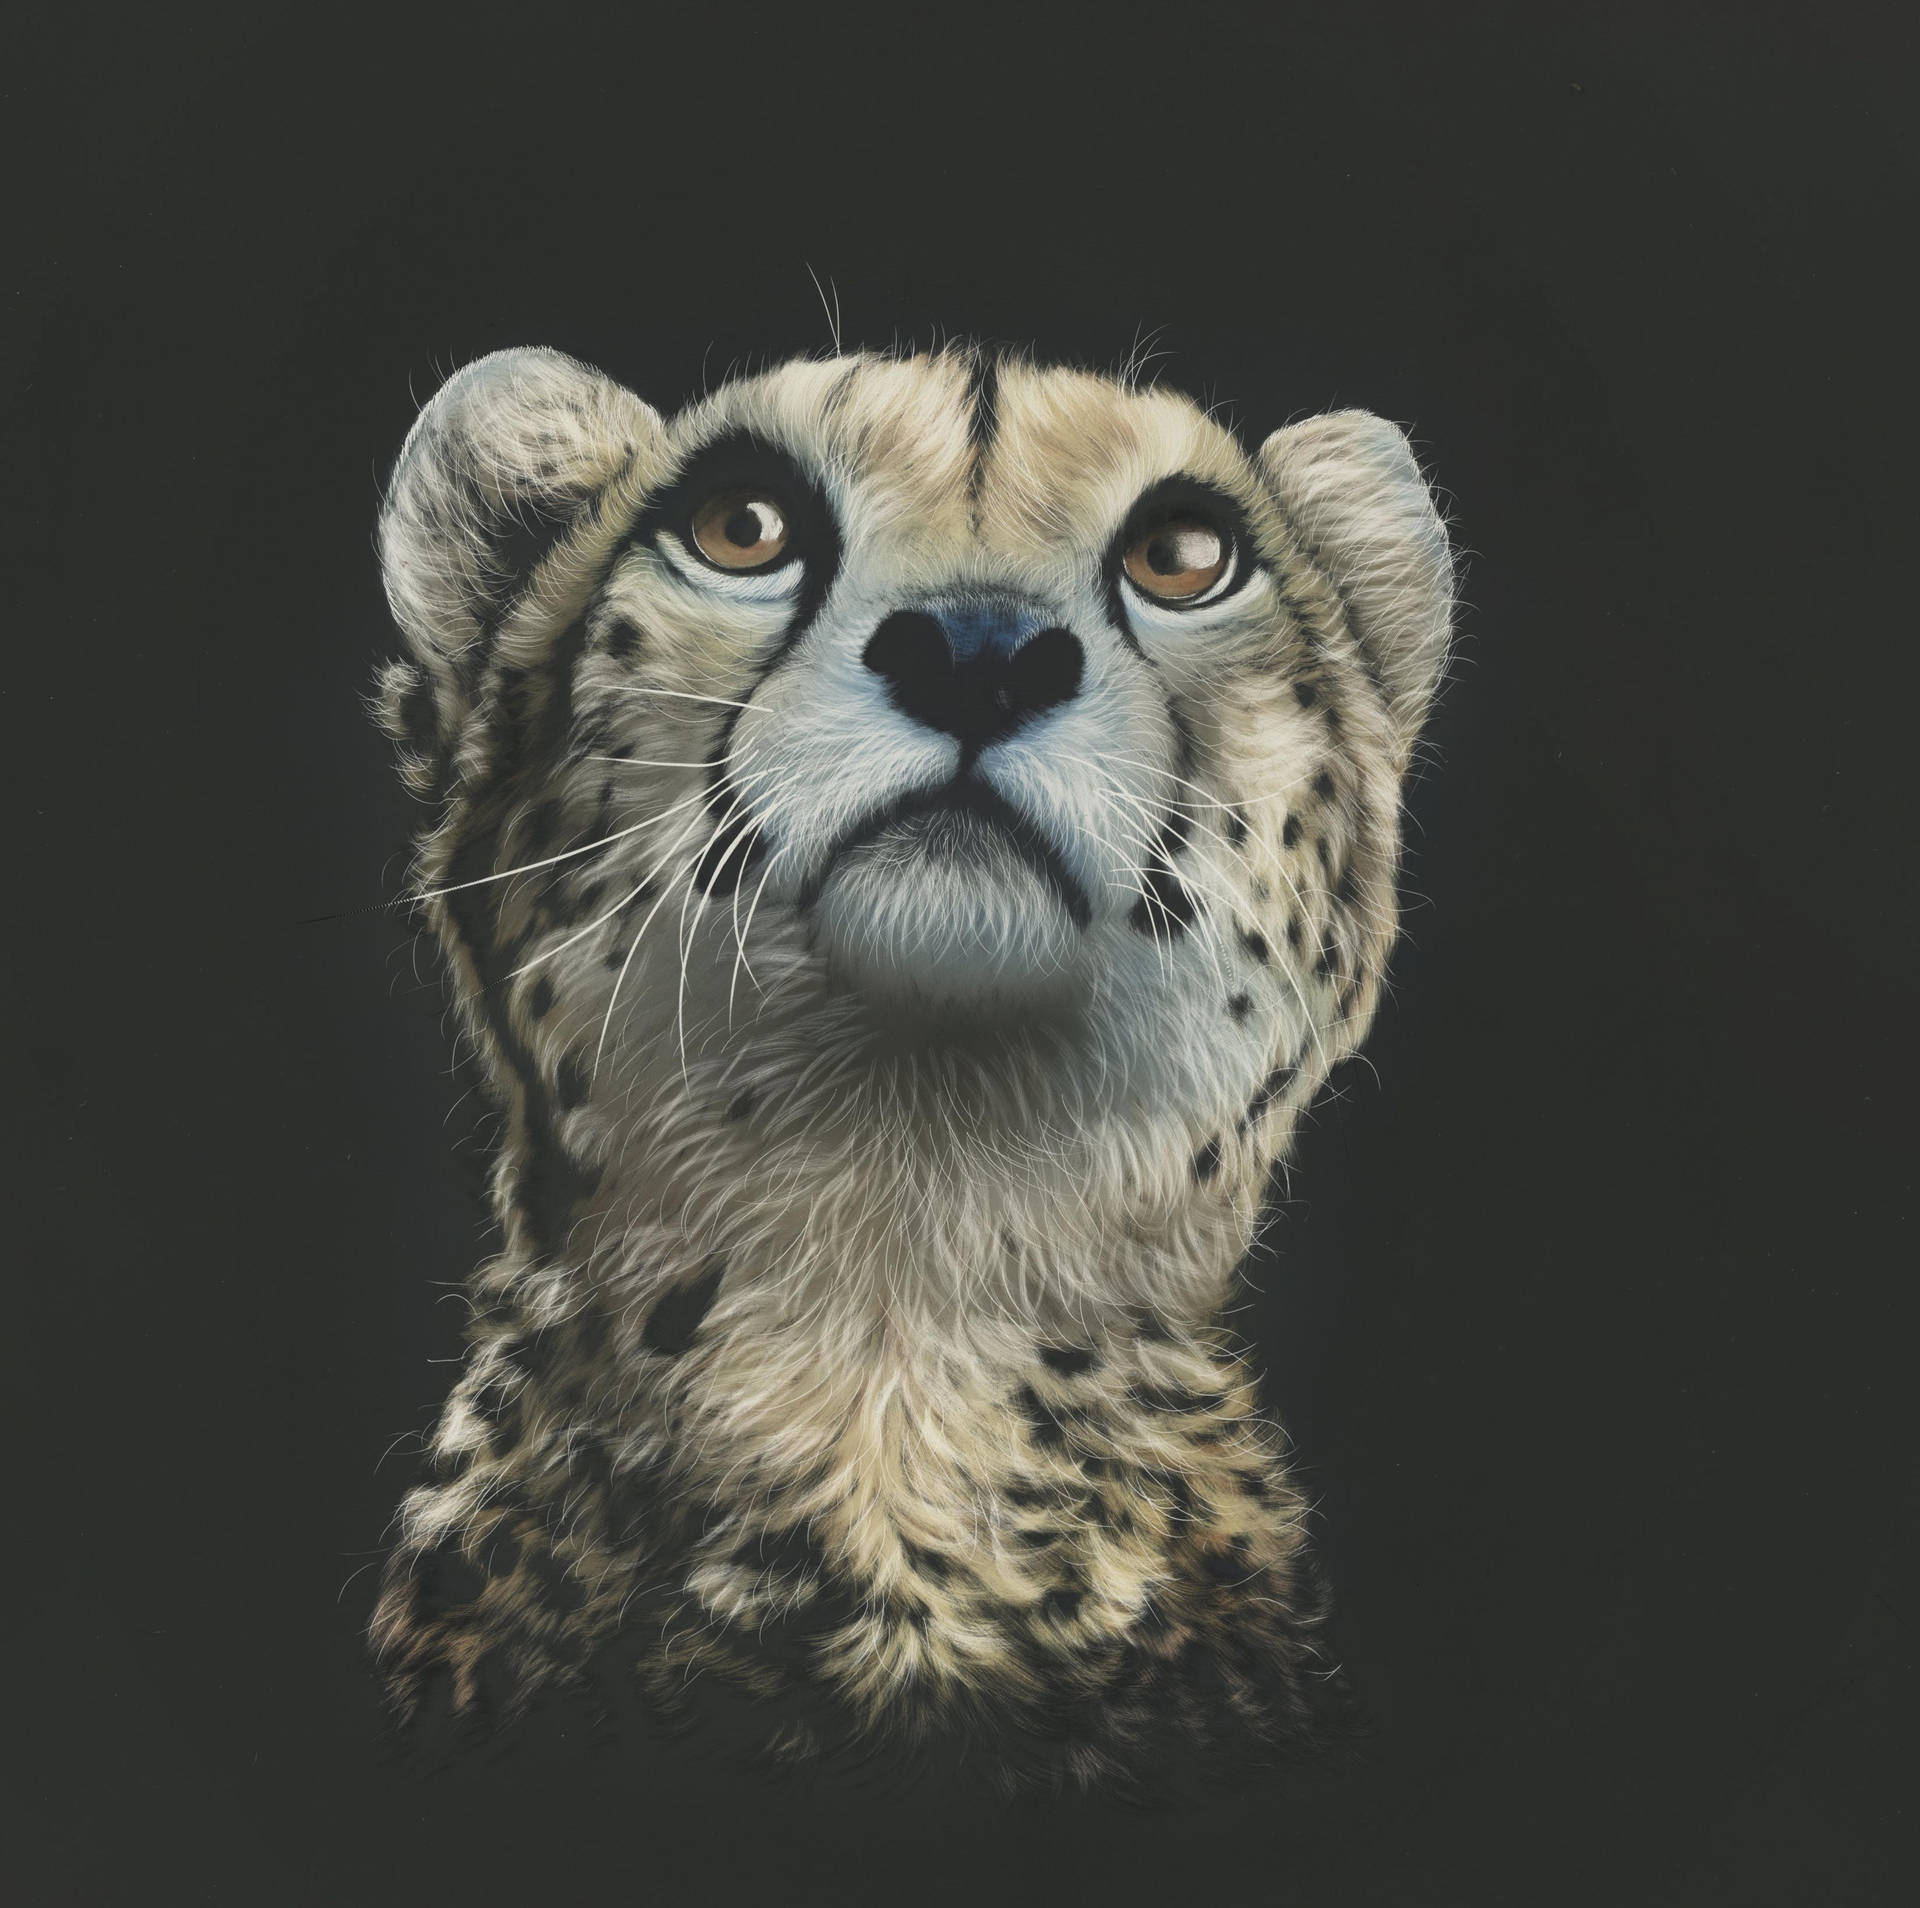 Cheetah 3298X3277 Wallpaper and Background Image